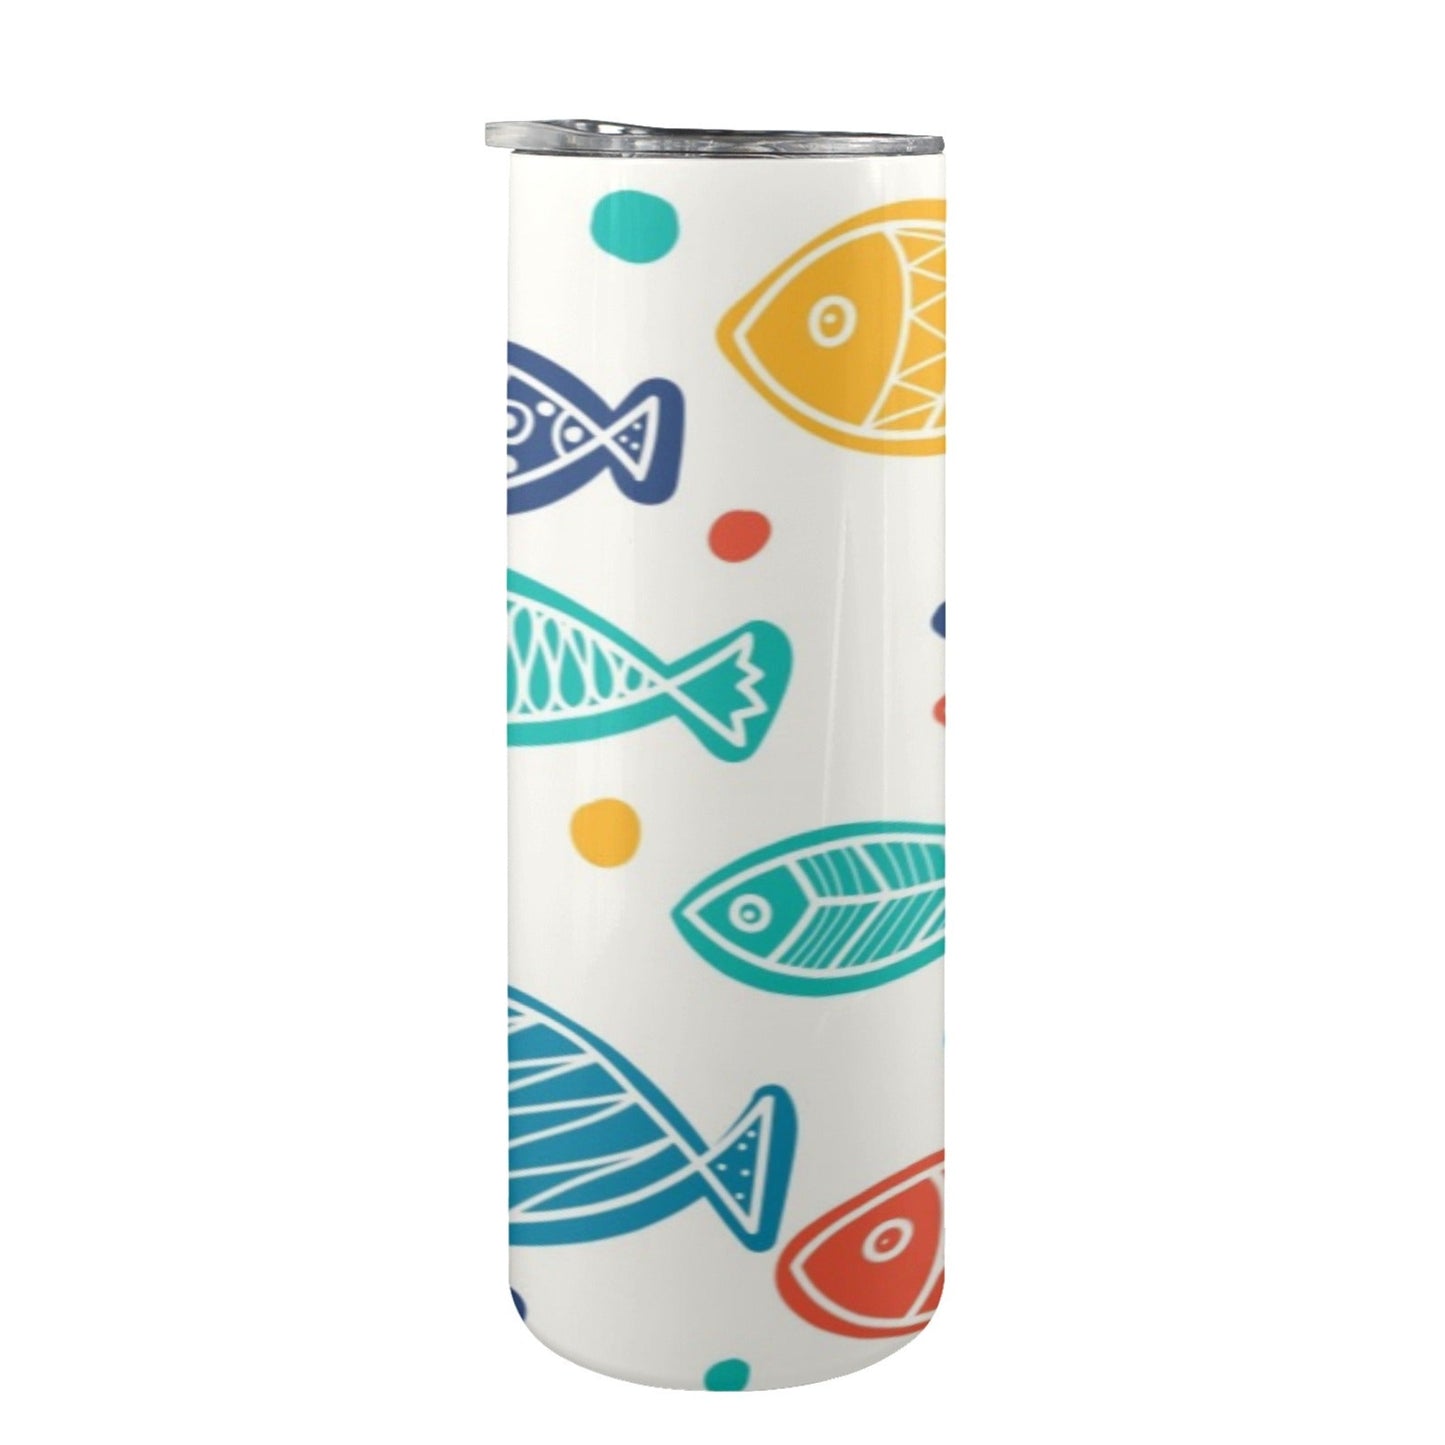 Fish - 20oz Tall Skinny Tumbler with Lid and Straw 20oz Tall Skinny Tumbler with Lid and Straw